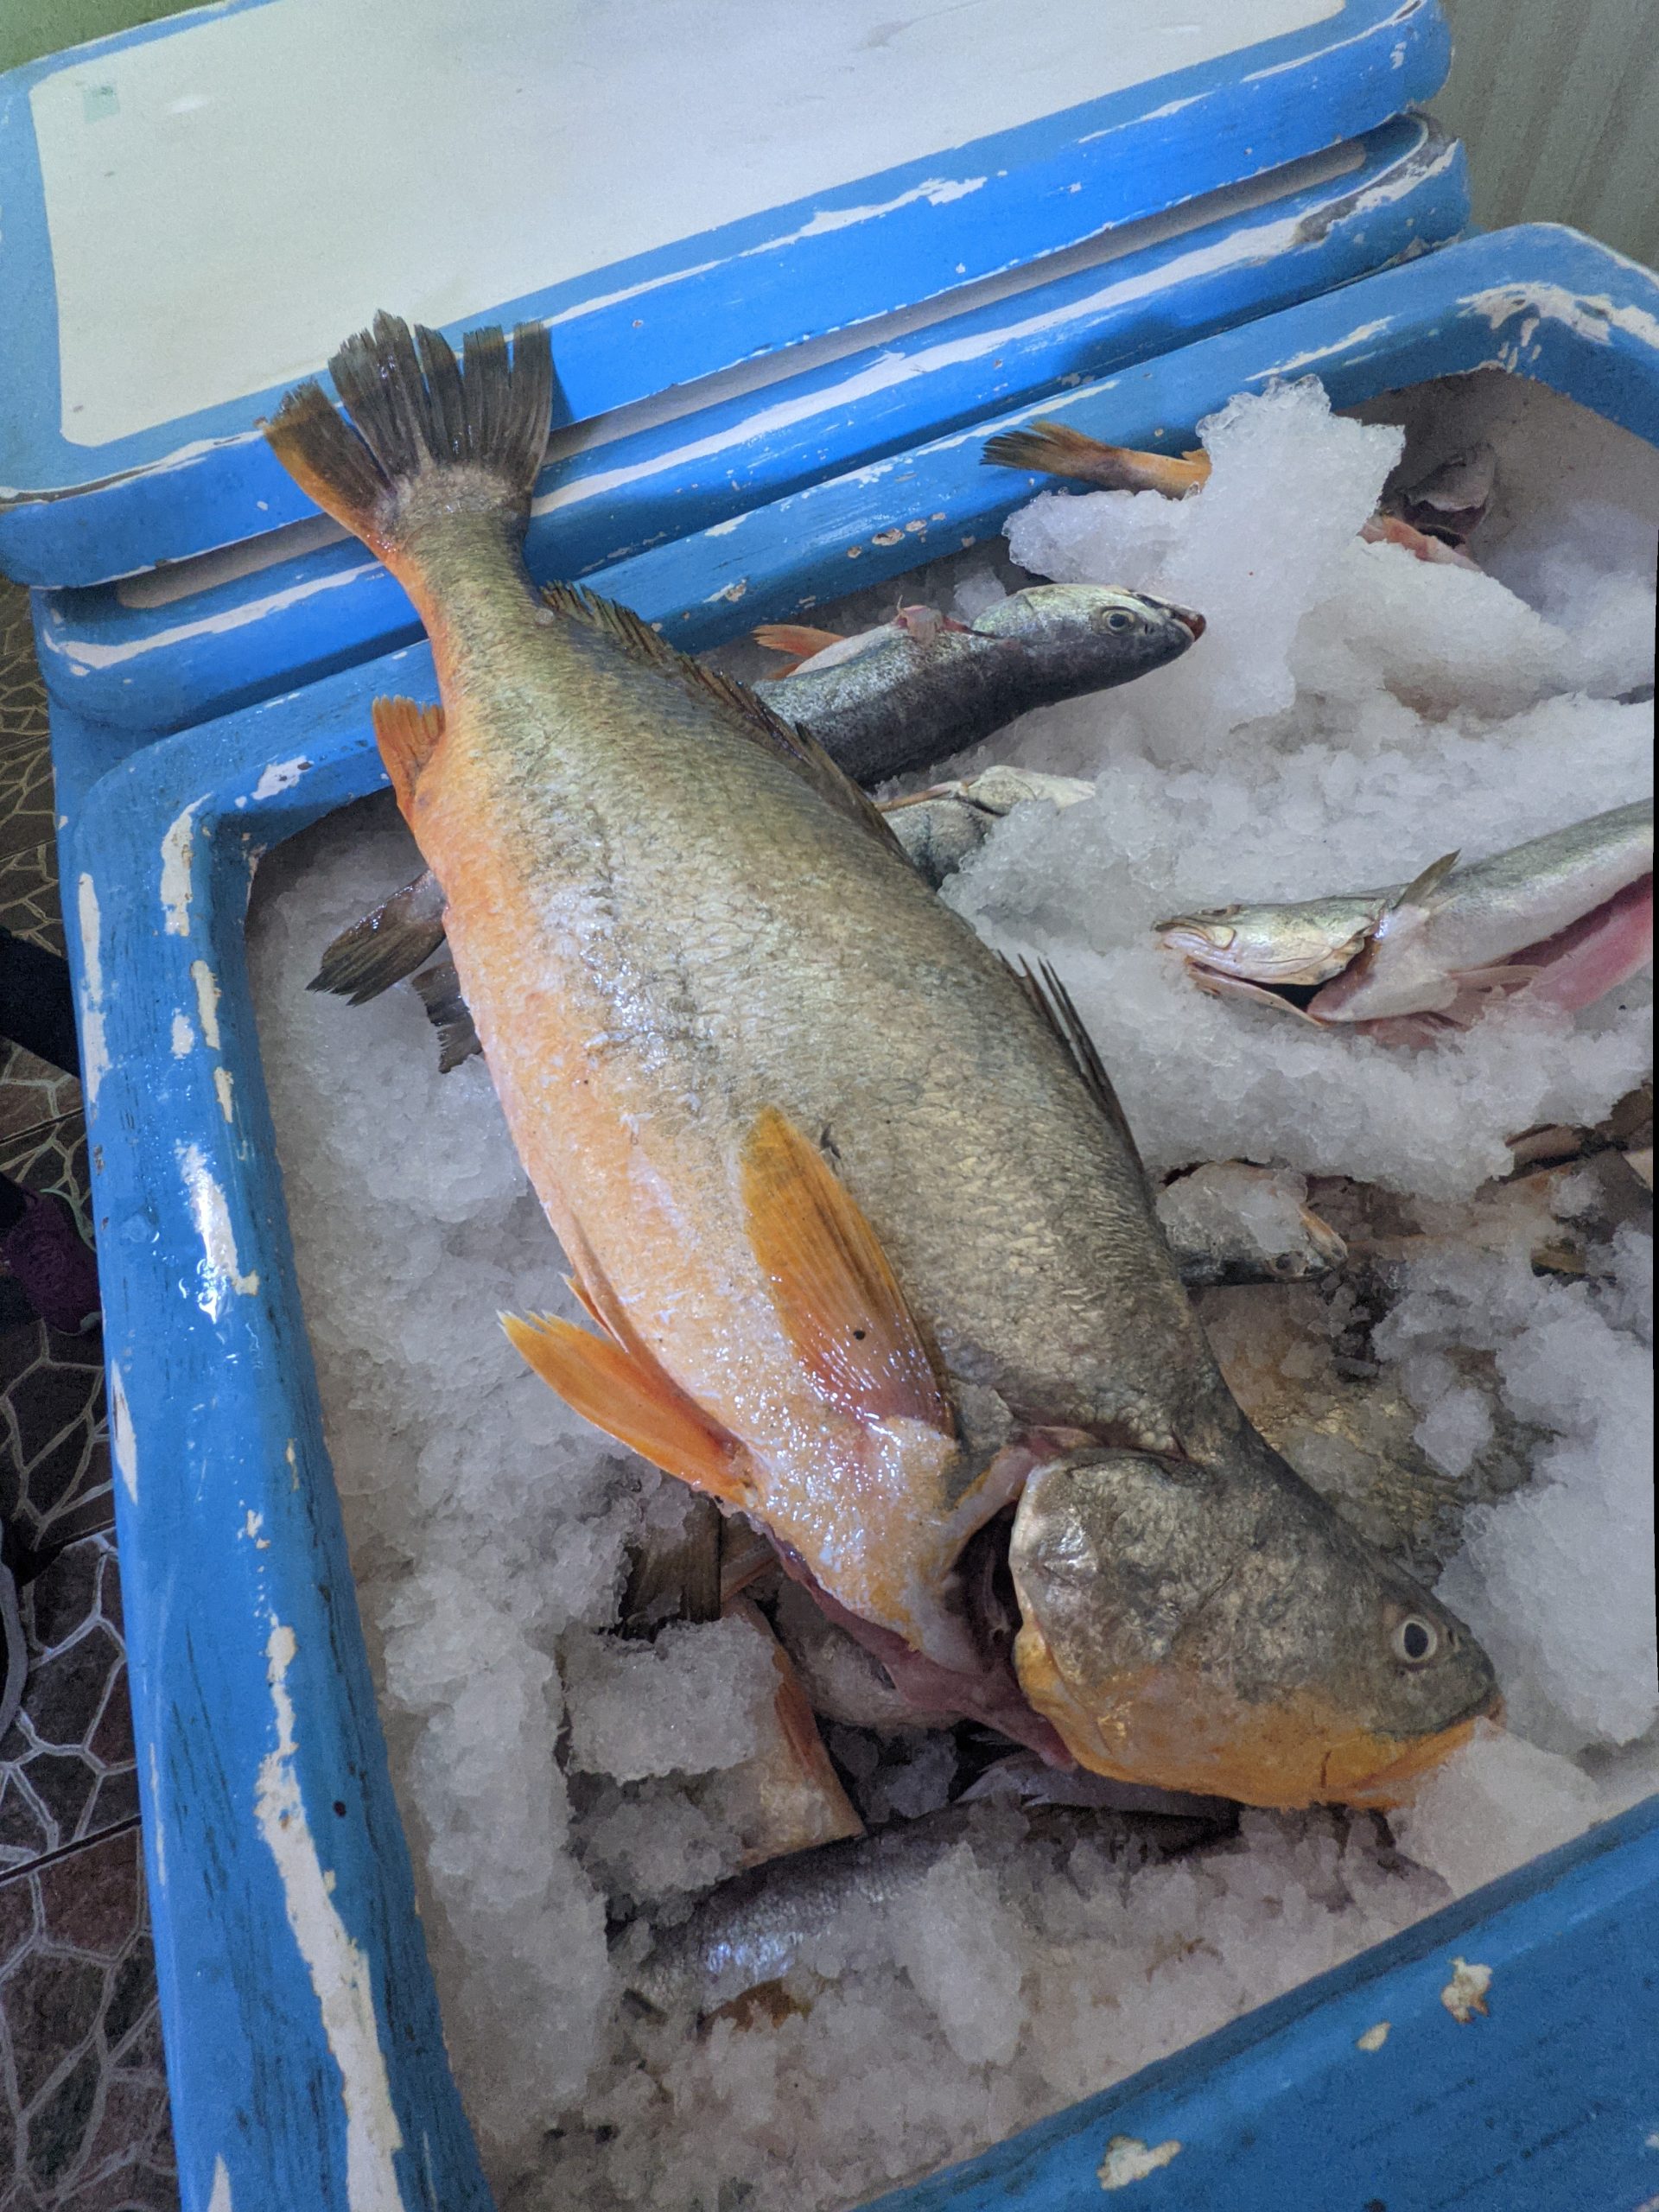 A caught fish in an ice chest